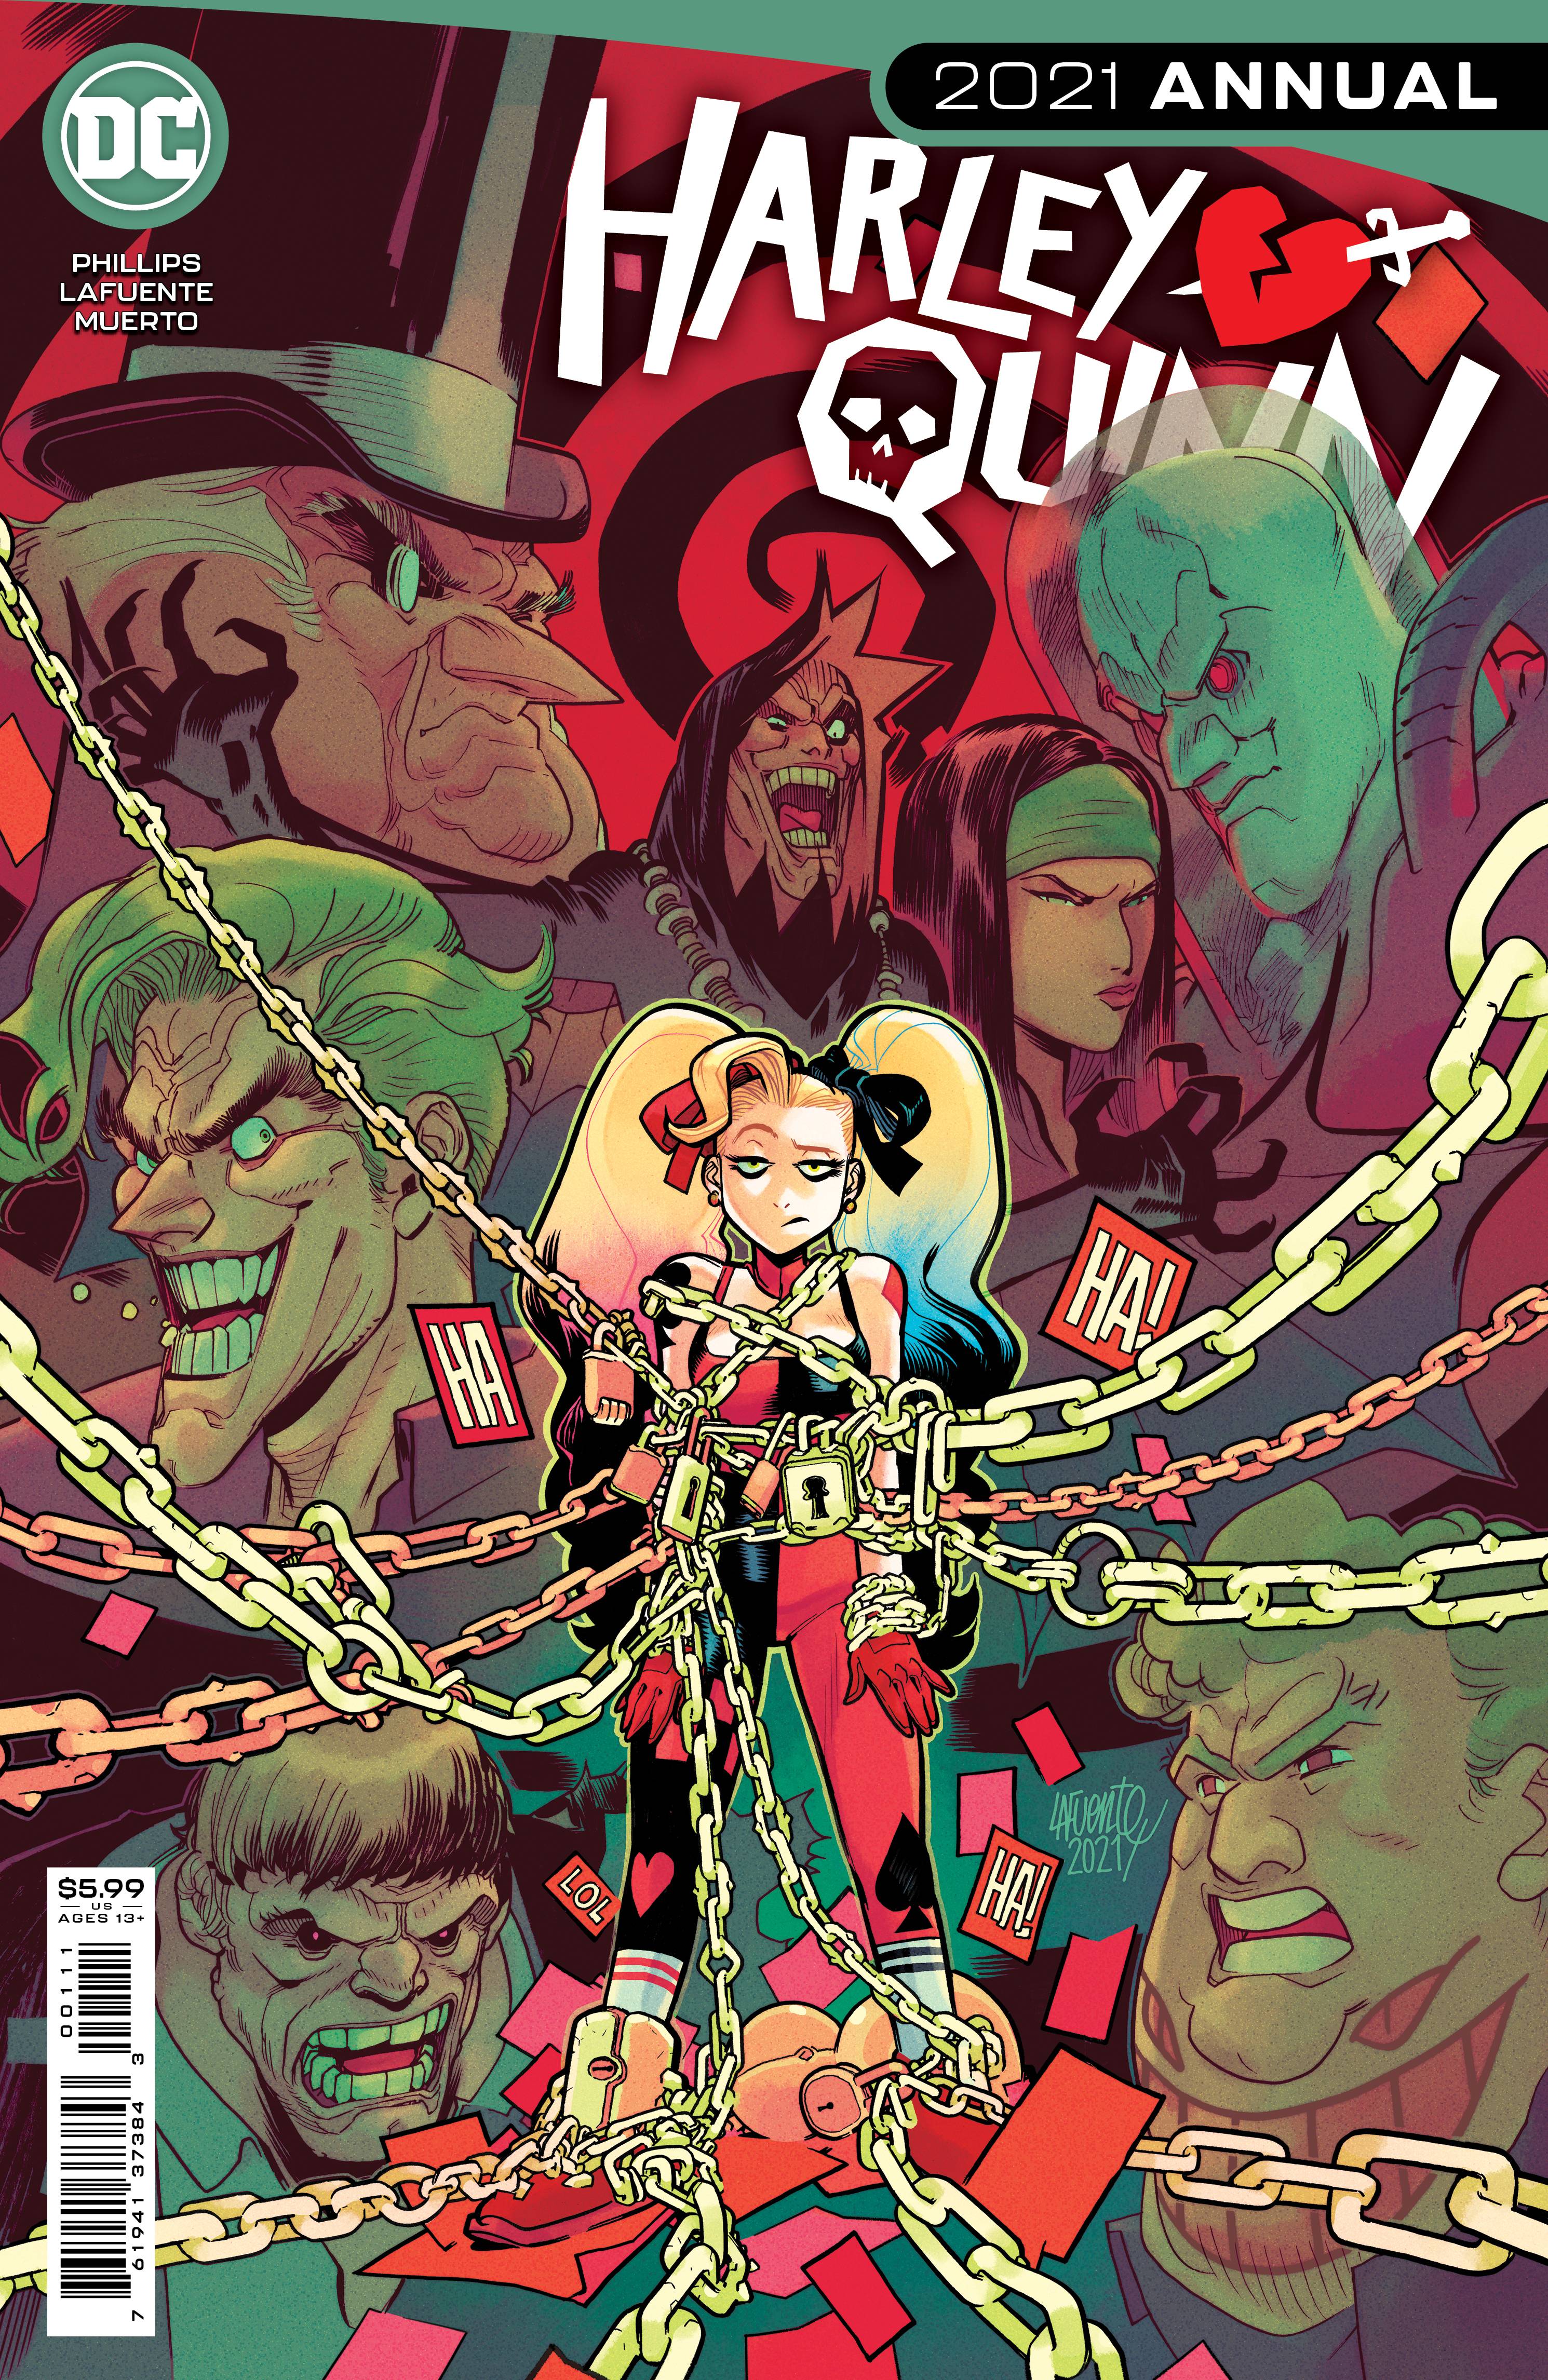 HARLEY QUINN 2021 ANNUAL #1 CVR A | Game Master's Emporium (The New GME)